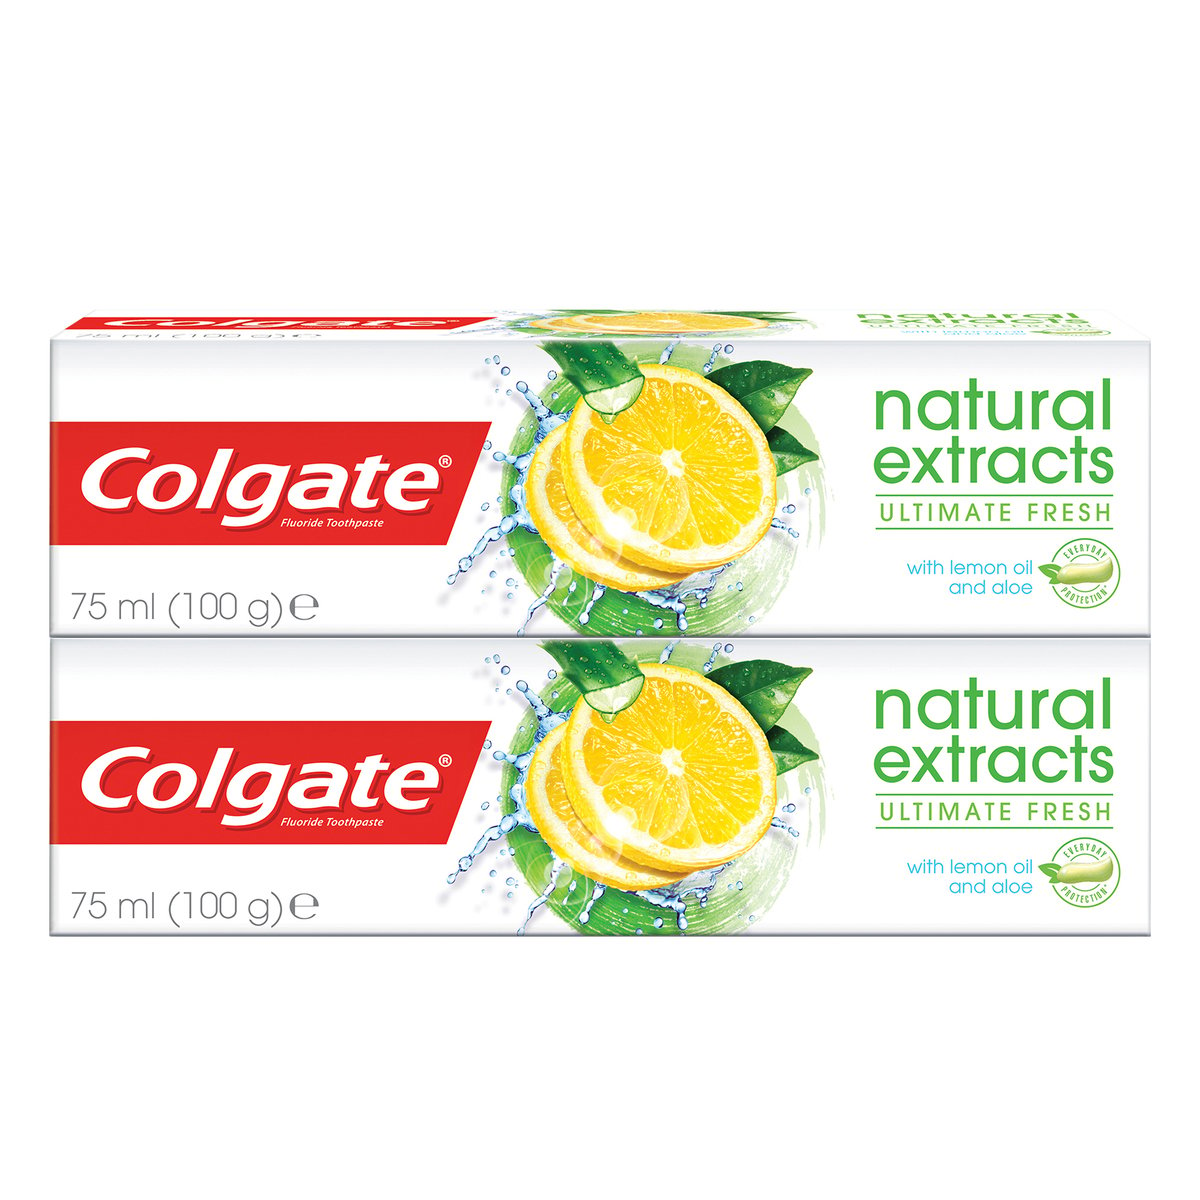 Colgate Toothpaste Natural Extracts Ultimate Fresh with Lemon Oil and Aloe 2 x 75 ml